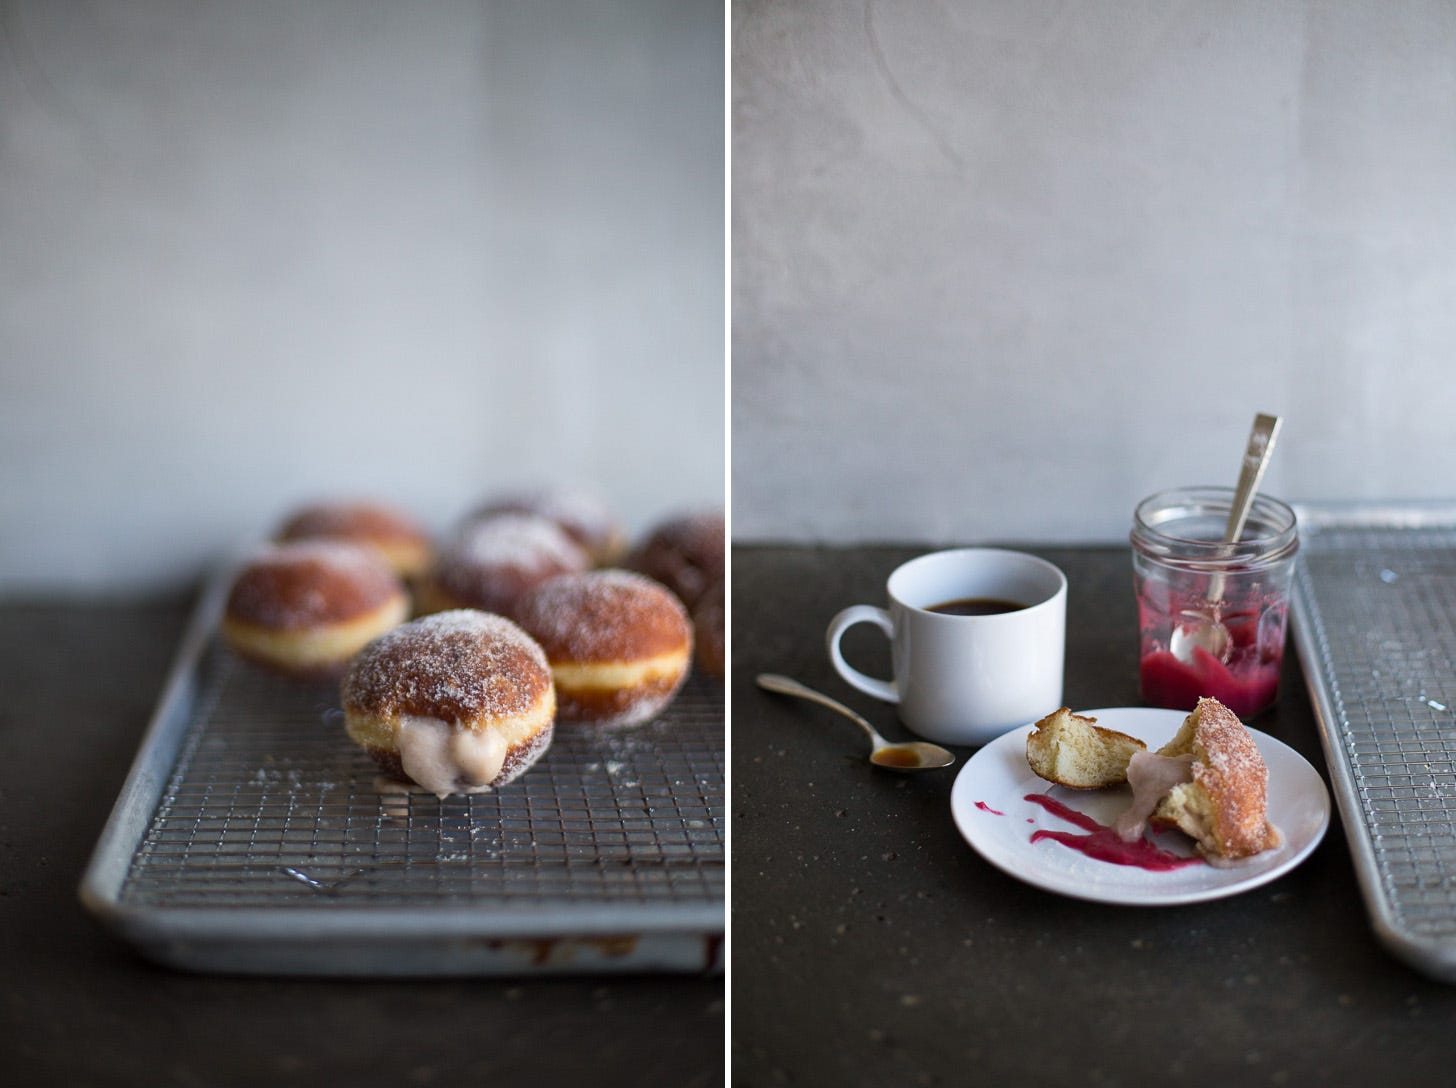 Two photos of strawberry cream-filled donuts